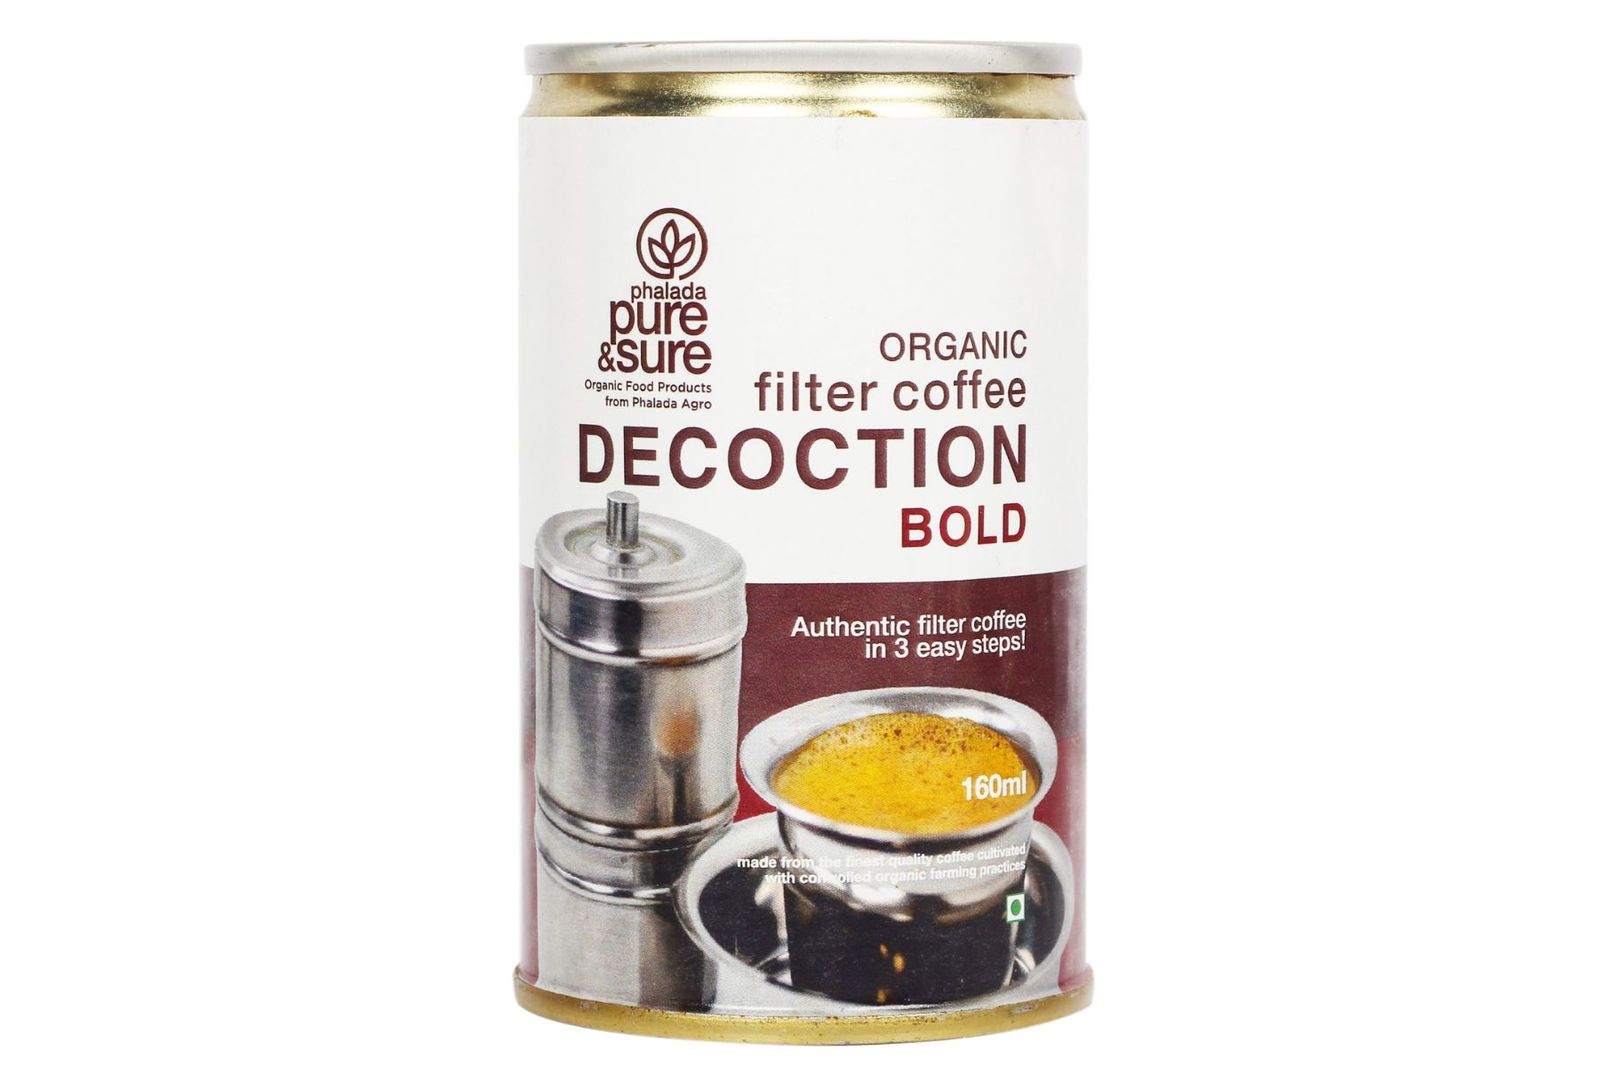 Pure & Sure Organic Filter Coffee Decoction Bold